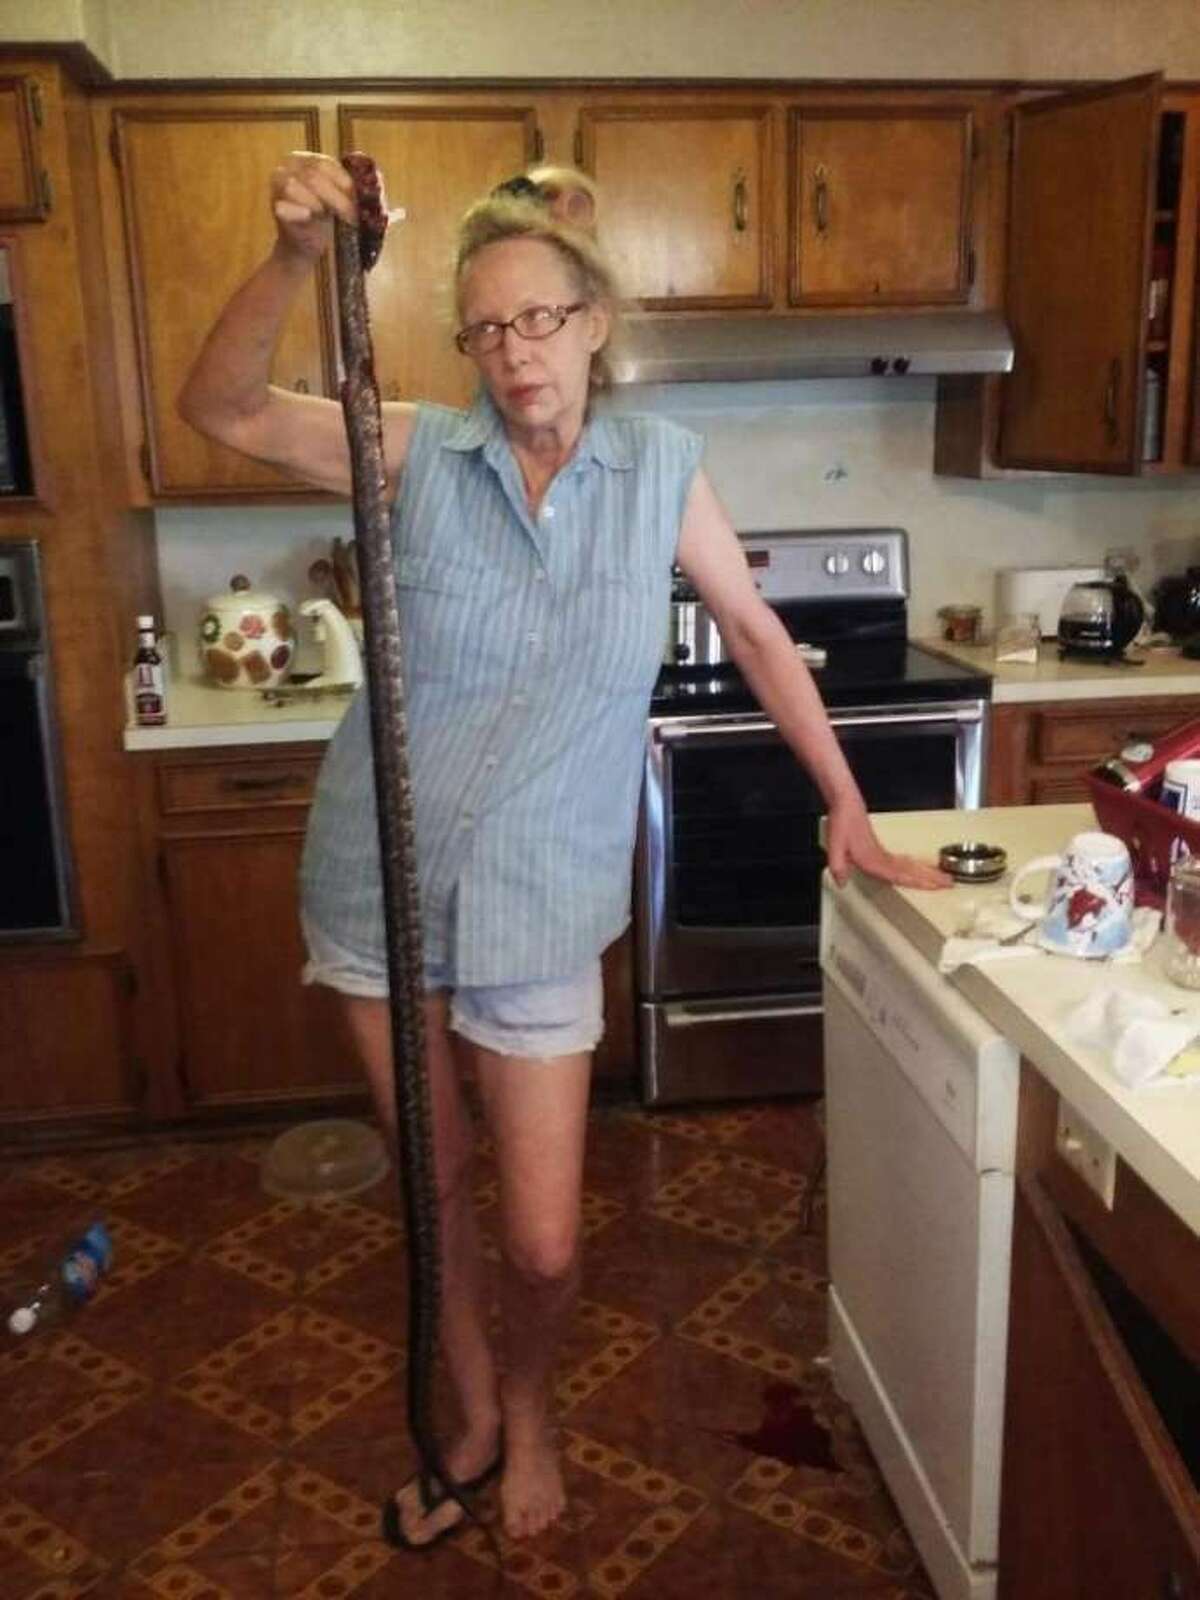 Deborah Burdette, from Willbarder County, and one of the snakes she found in her kitchen and killed.